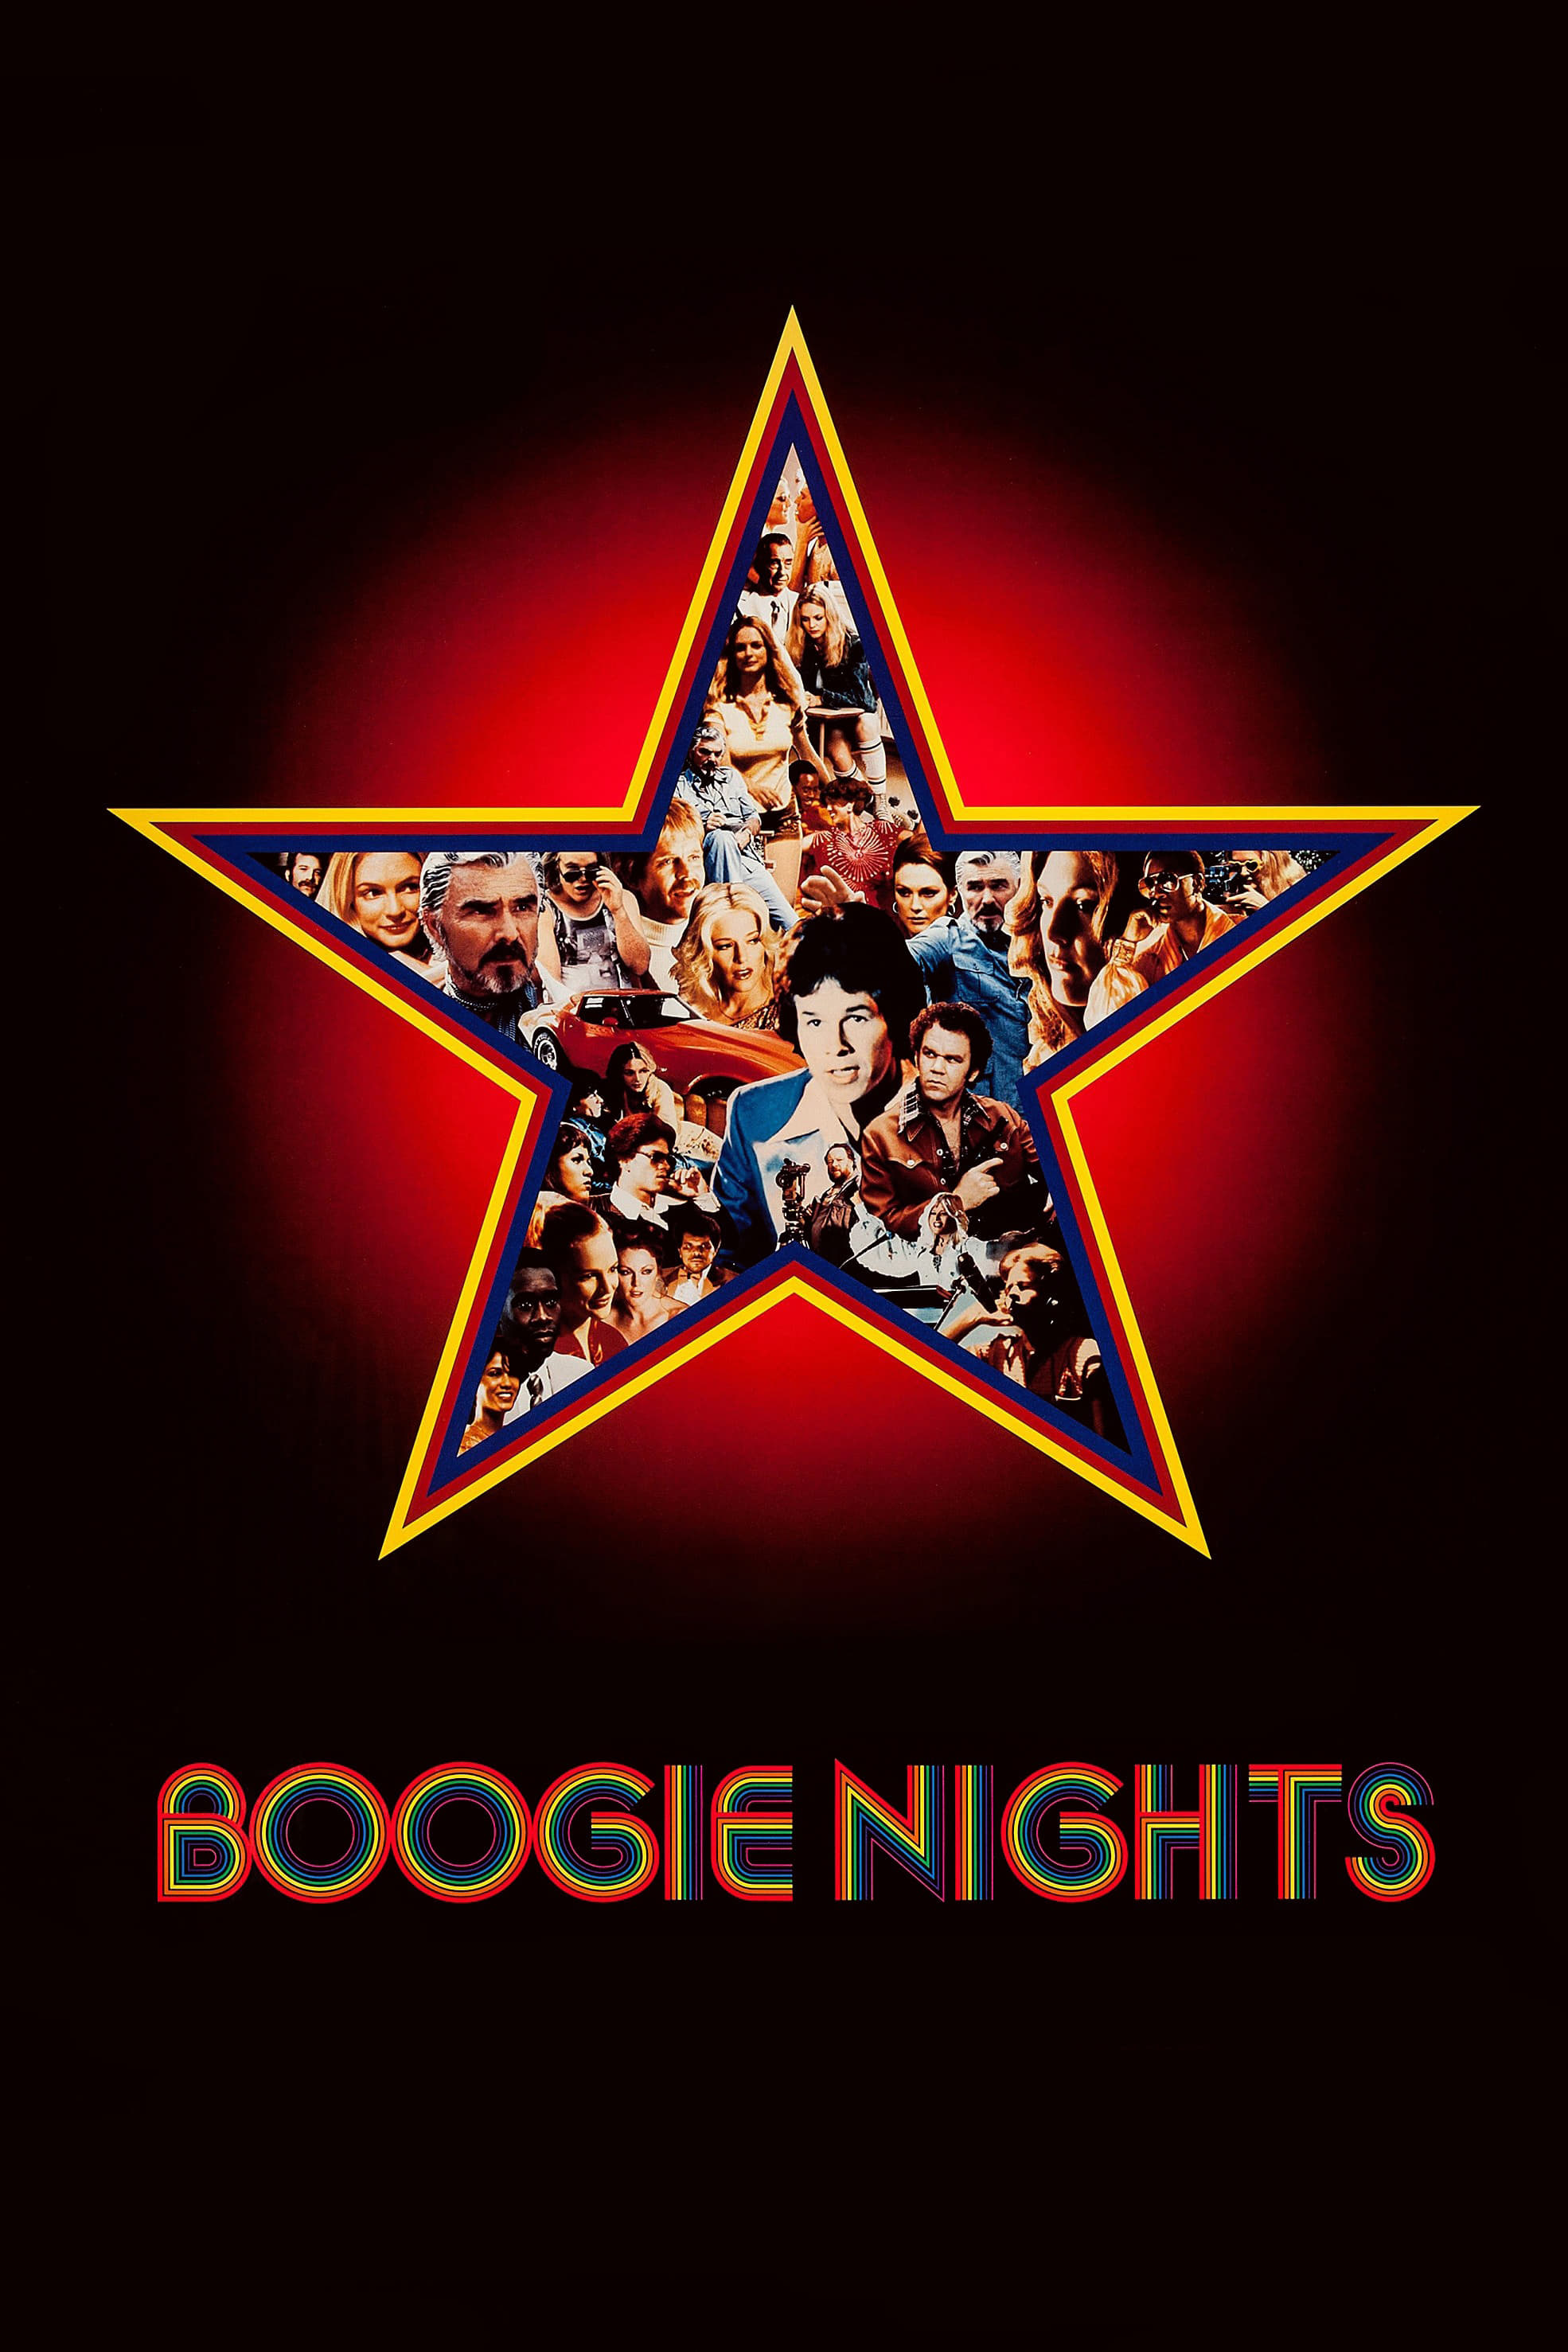 Poster Boogie Nights